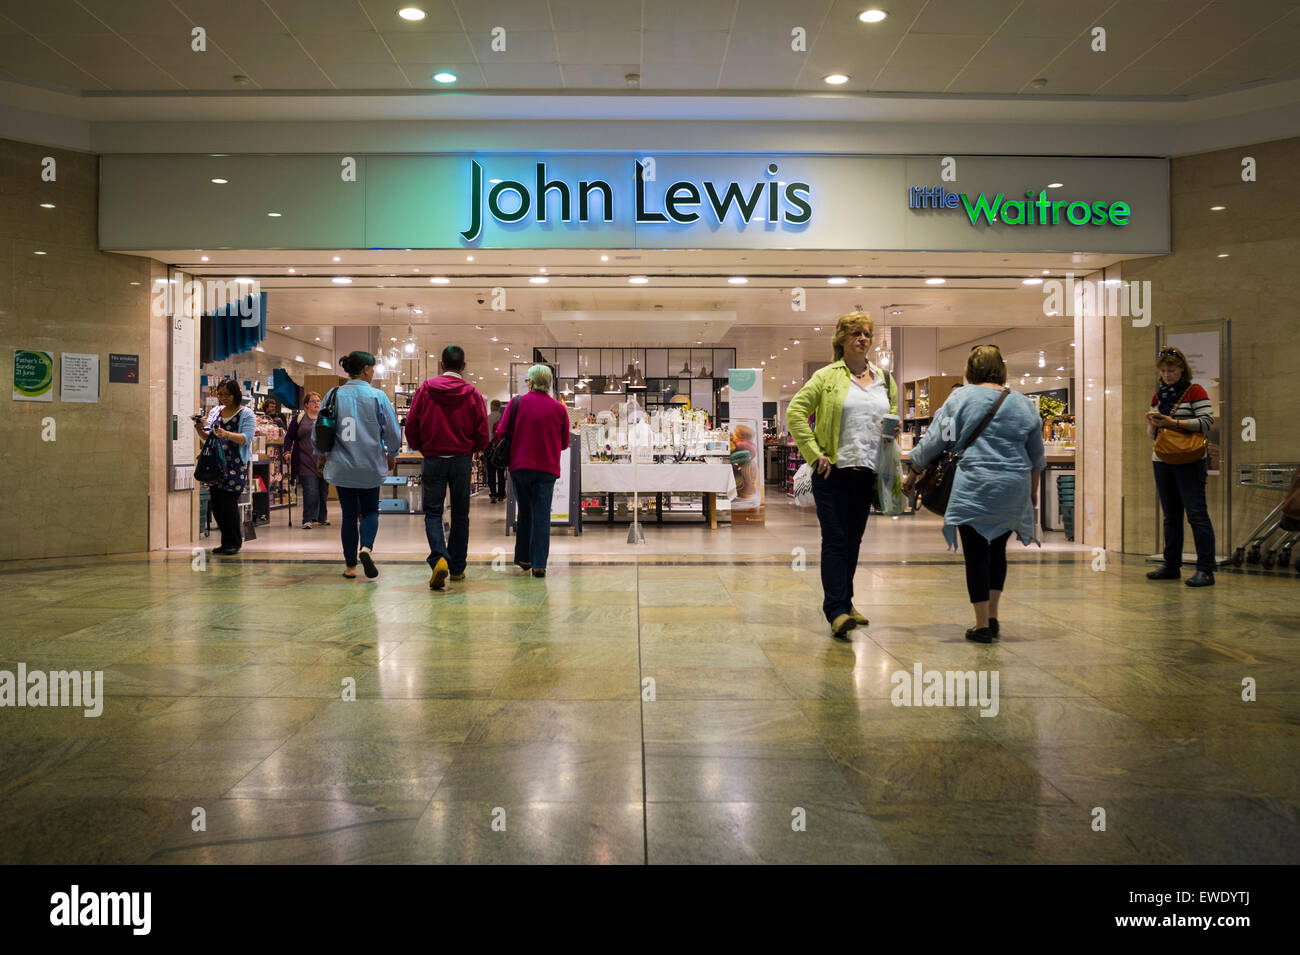 Entrance to John Lewis department store in West Quay shopping mall Stock Photo